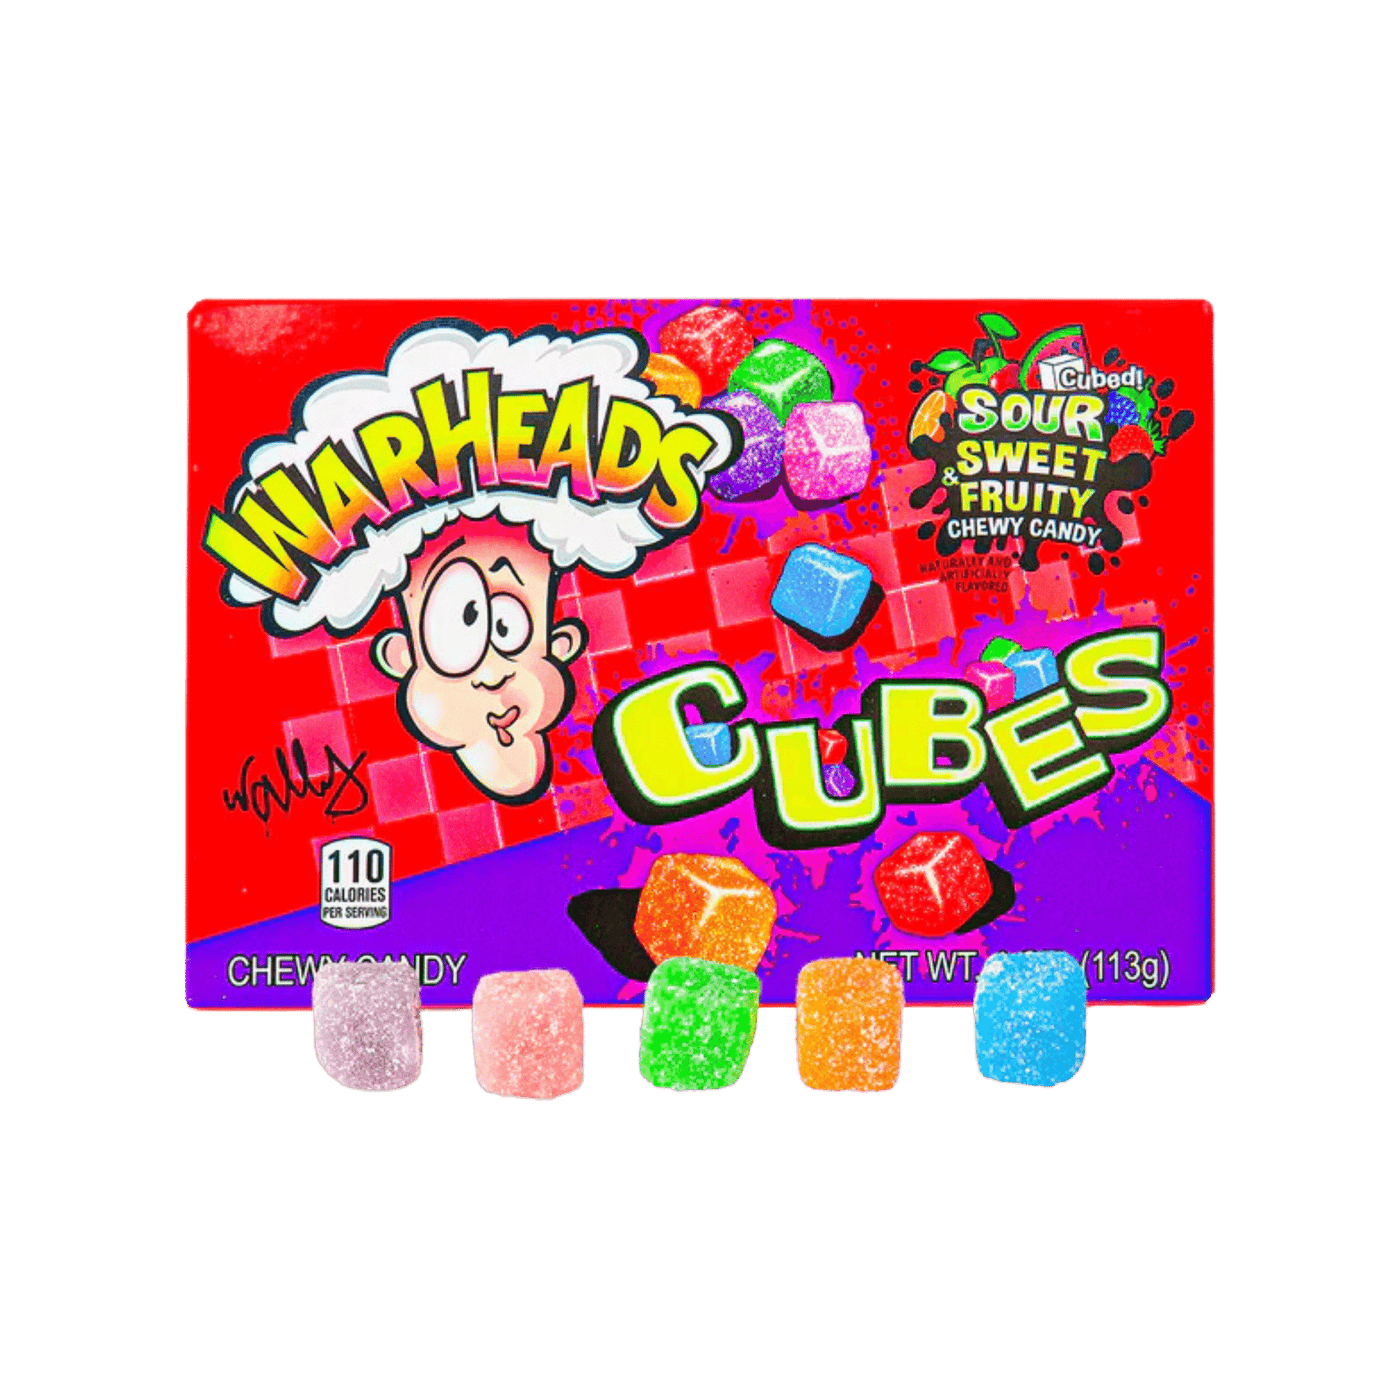 Warheads - Sour Cubes Theater box (113g)